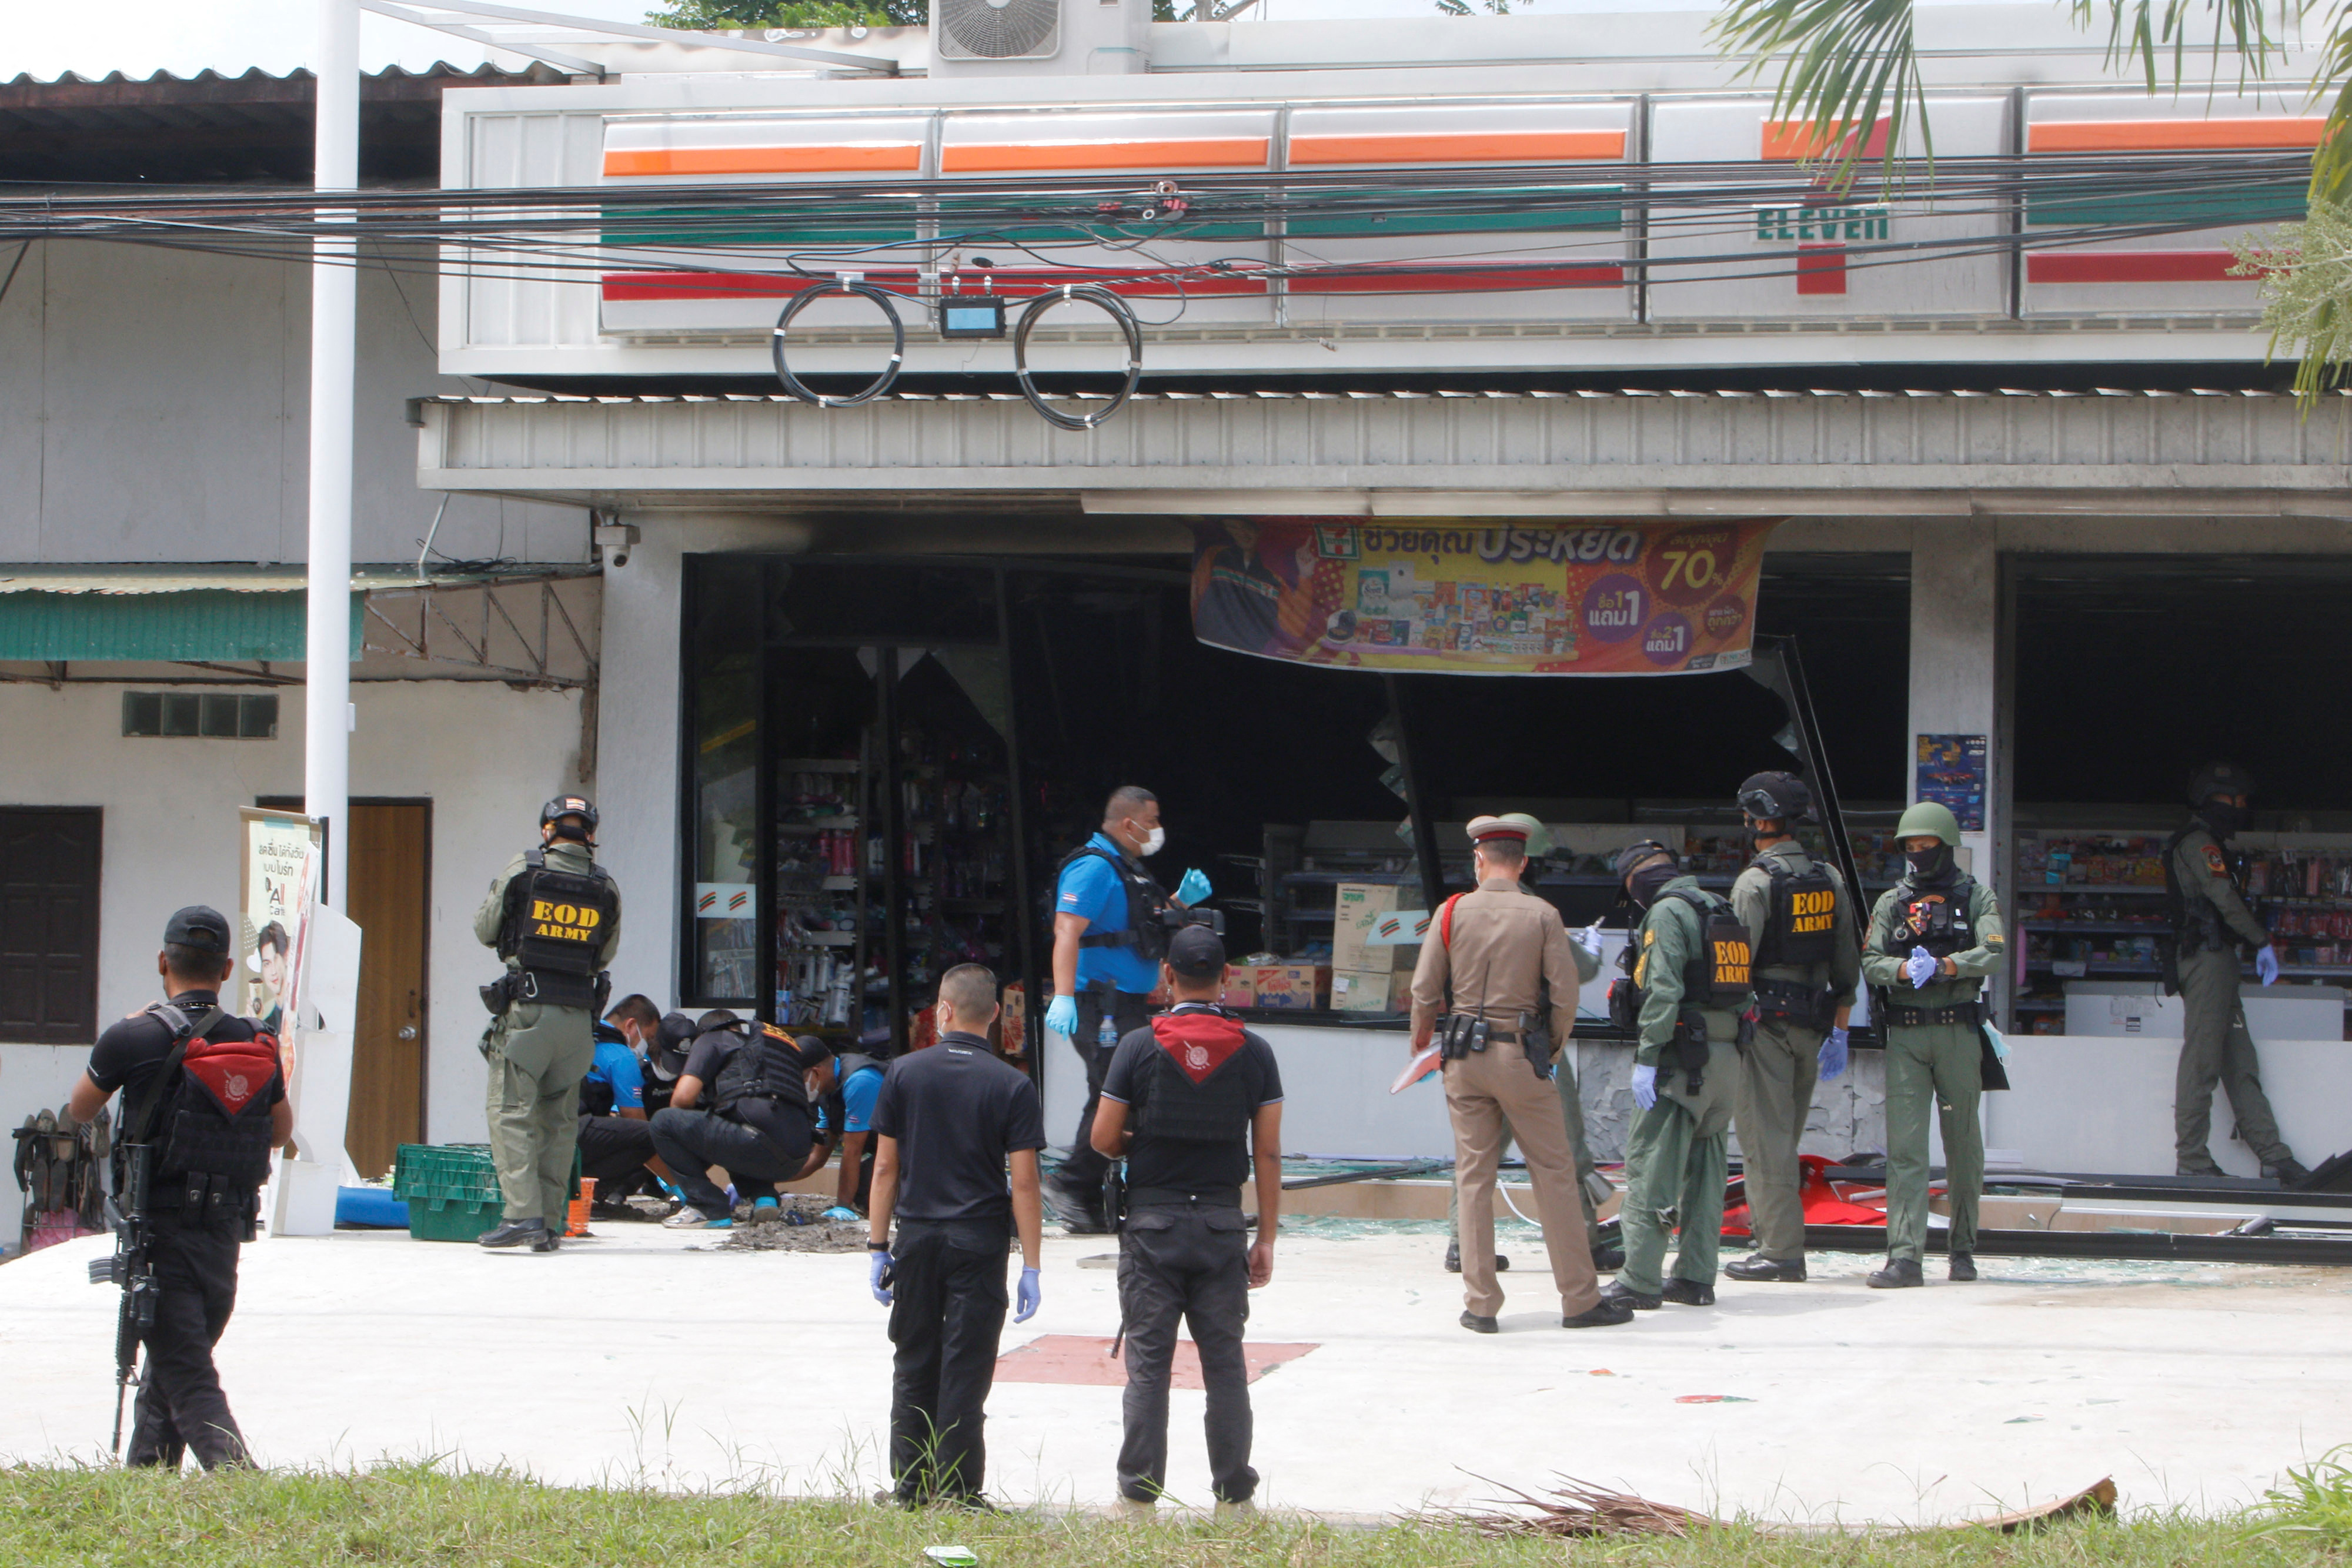 Emergency service members work in front of a shop after an explosion in Yala